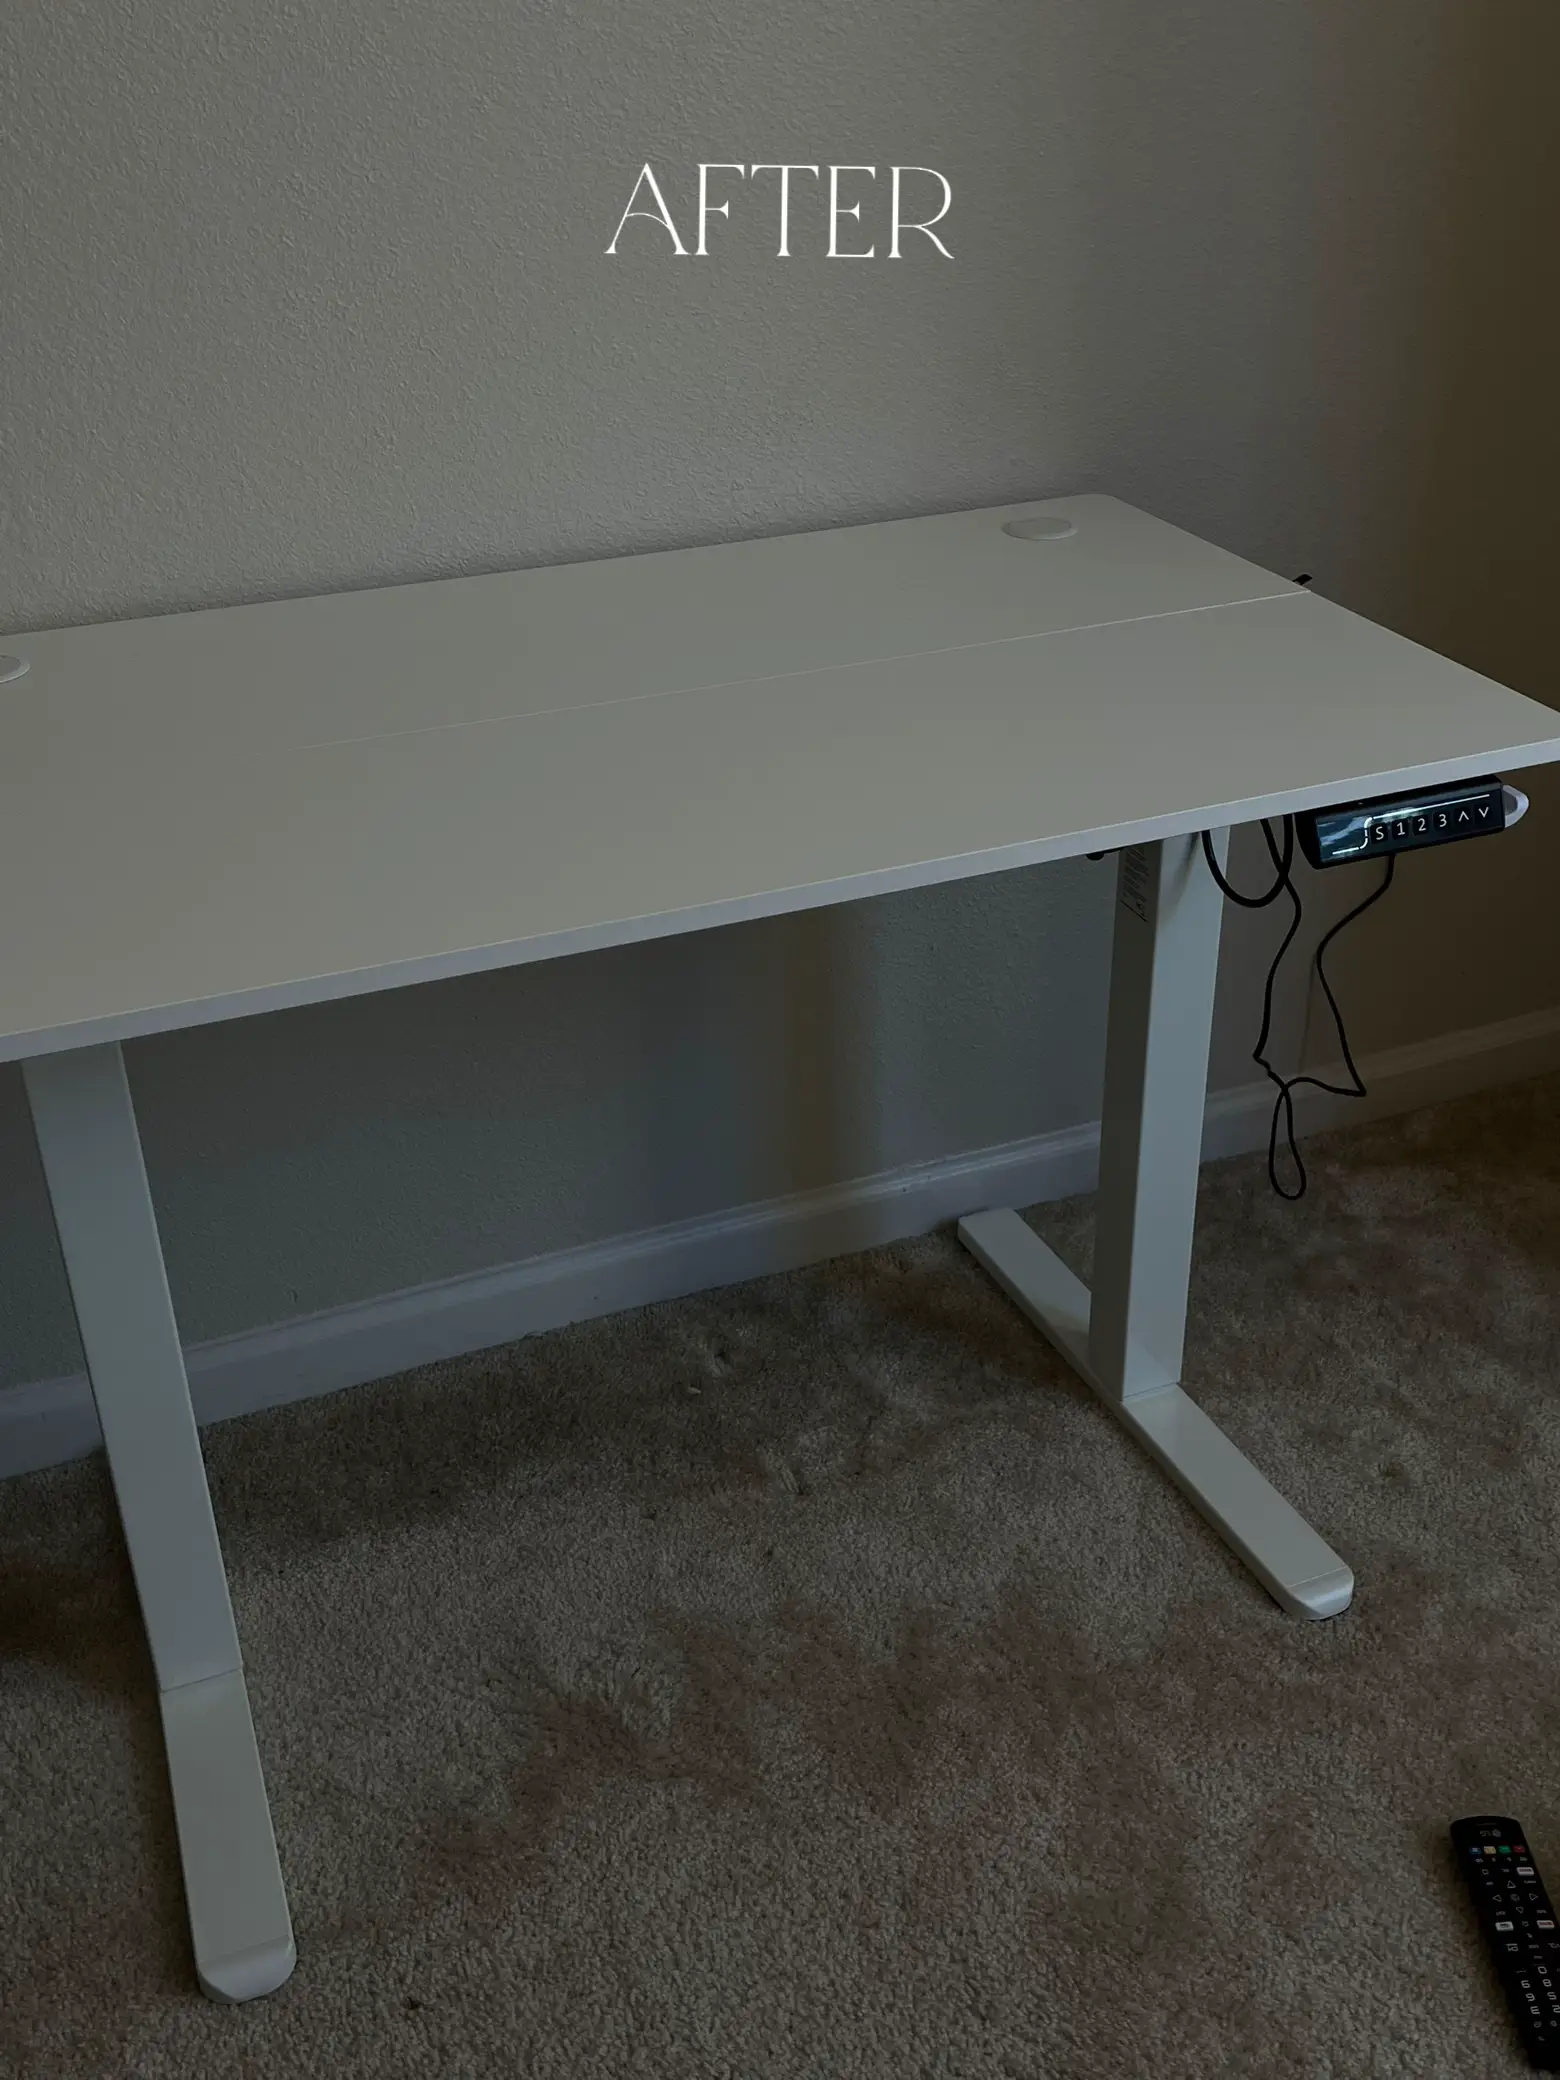 WFH Standing Desk Essentials, Gallery posted by Lyndsay B. Q.